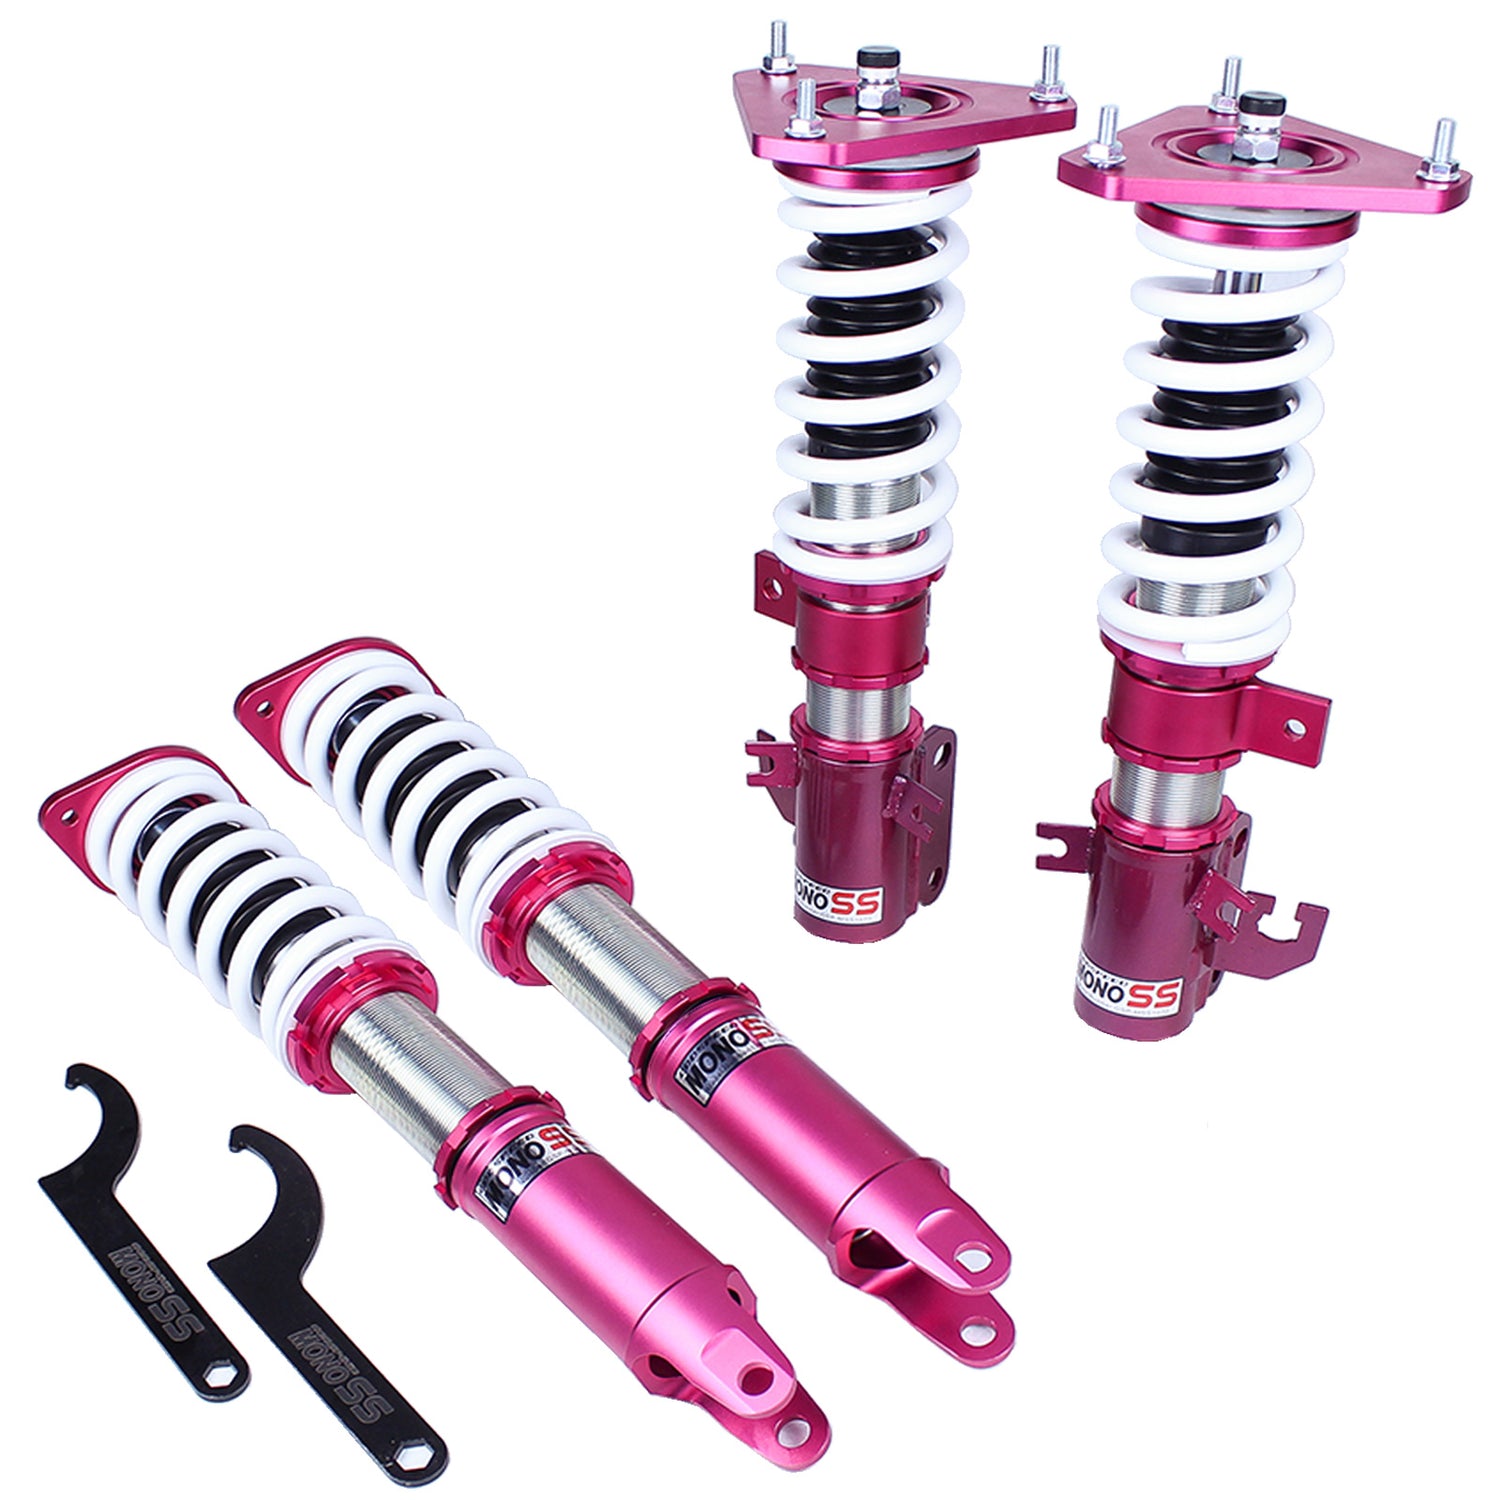 Godspeed MSS1070-E MonoSS Coilover Lowering Kit, Fully Adjustable, Ride Height, Spring Tension And 16 Click Damping, Nissan Altima Coupe(D32) 2008-13